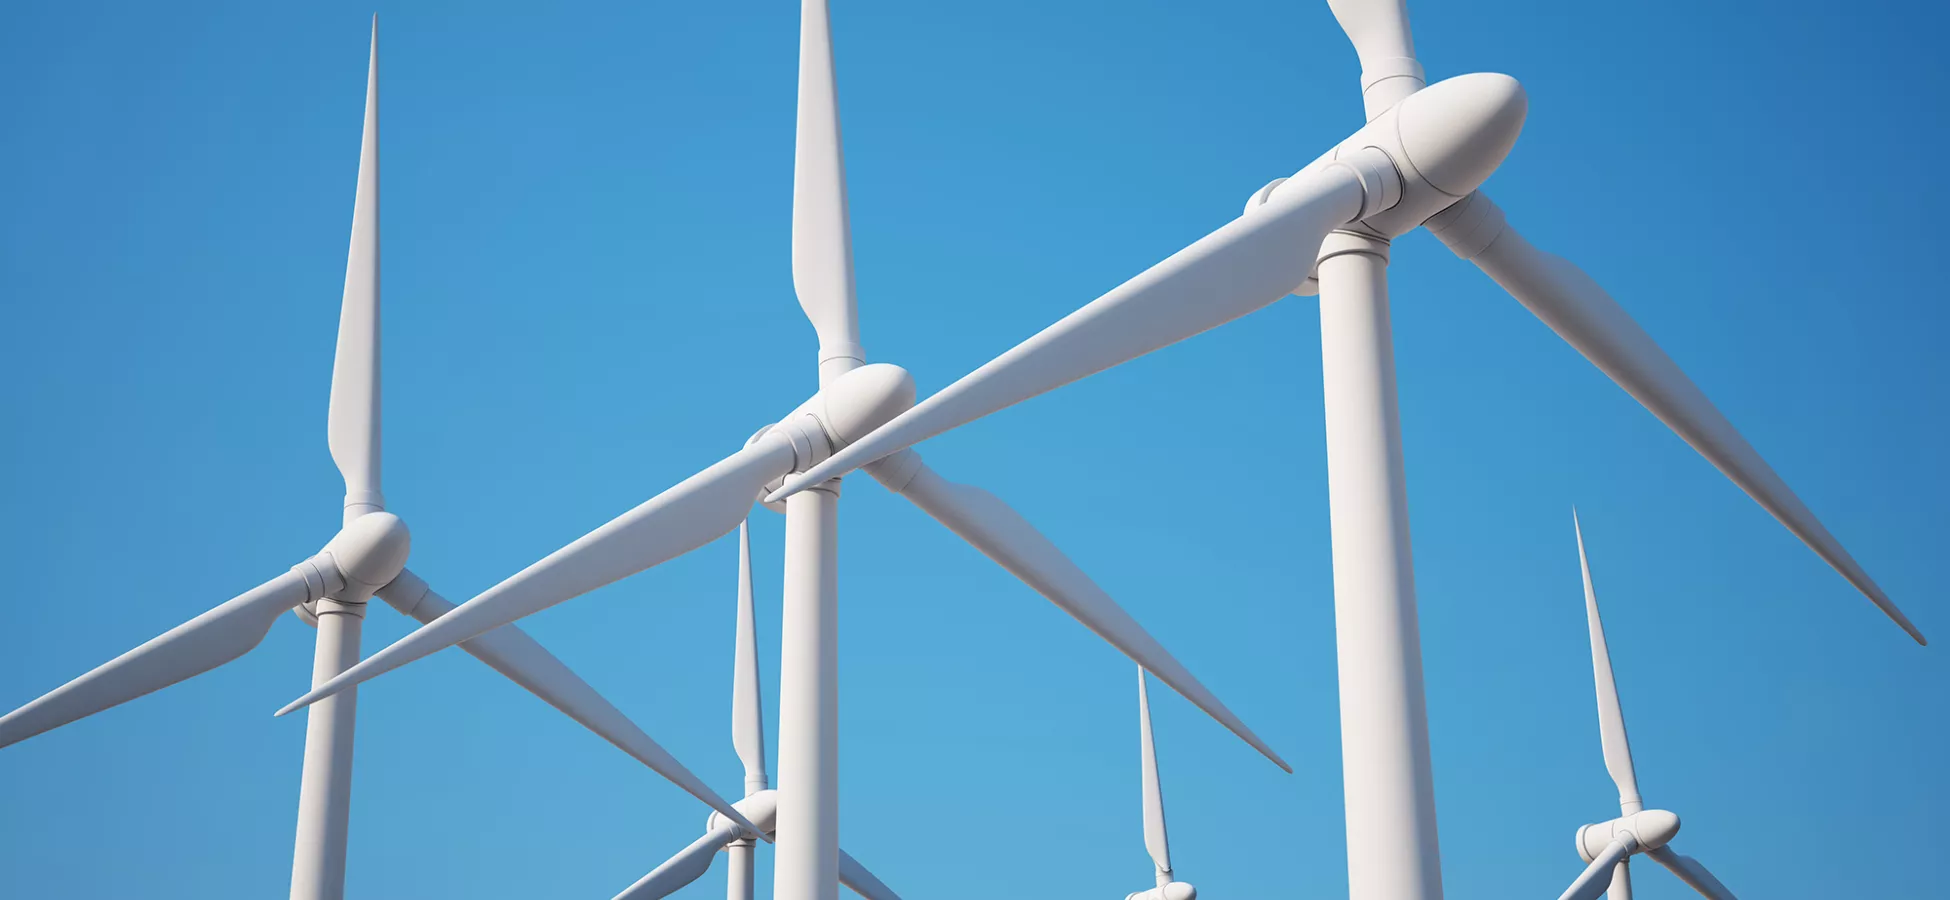 detail of six wind turbines standing in formation